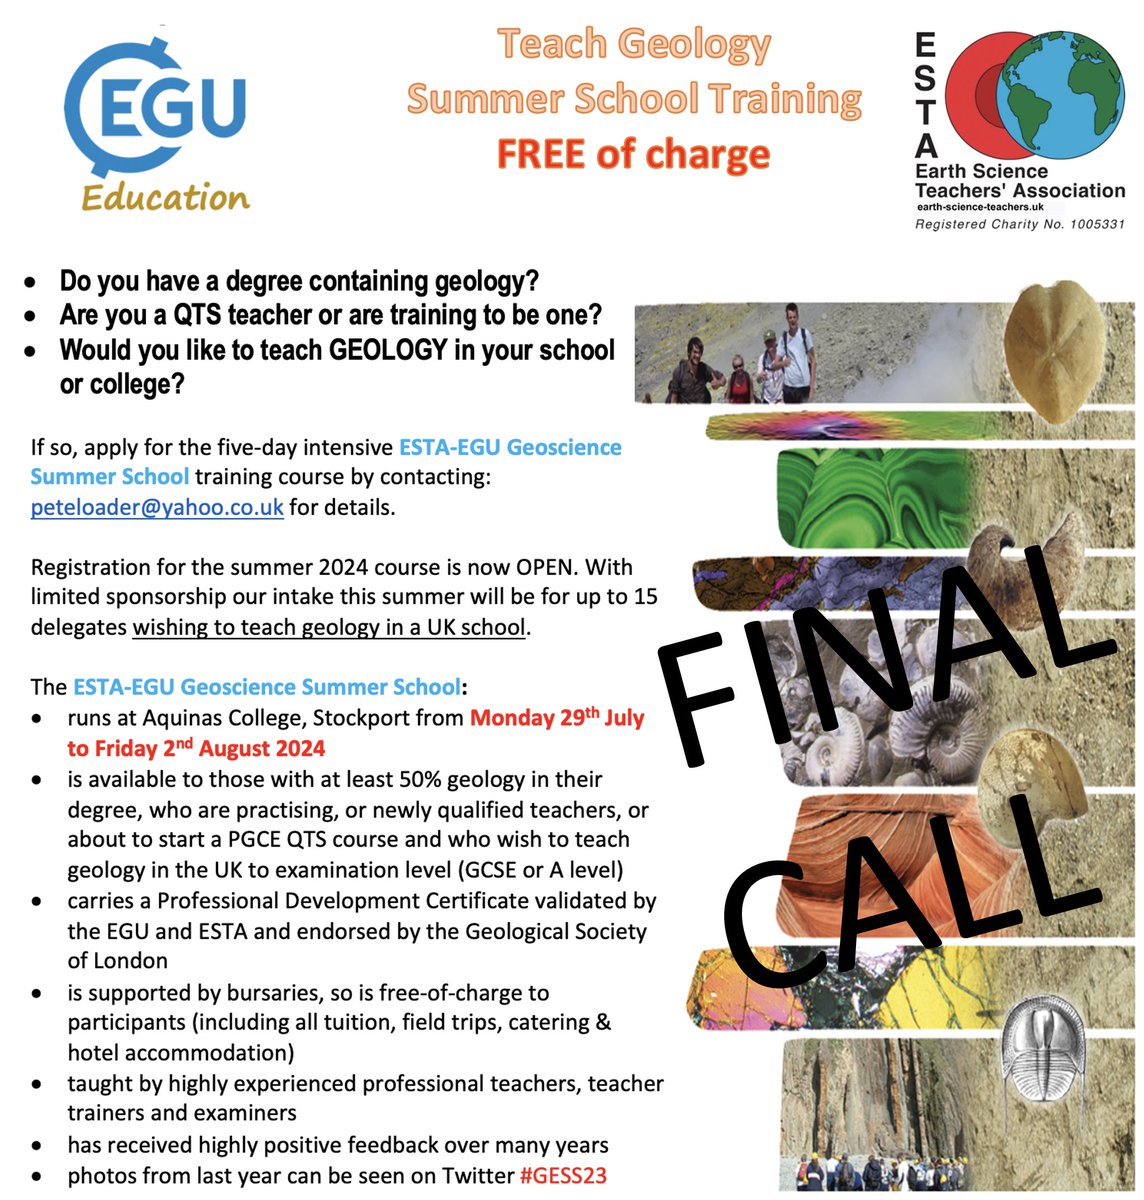 For all UK #GeographyTeachers - if you are interested in improving your geology pedagogy at GCSE and/or A-level, then there's still at least 1 place left on this summer's paid for (incl. hotel!!) 1-week course from @ESTA_UK ... Details attached